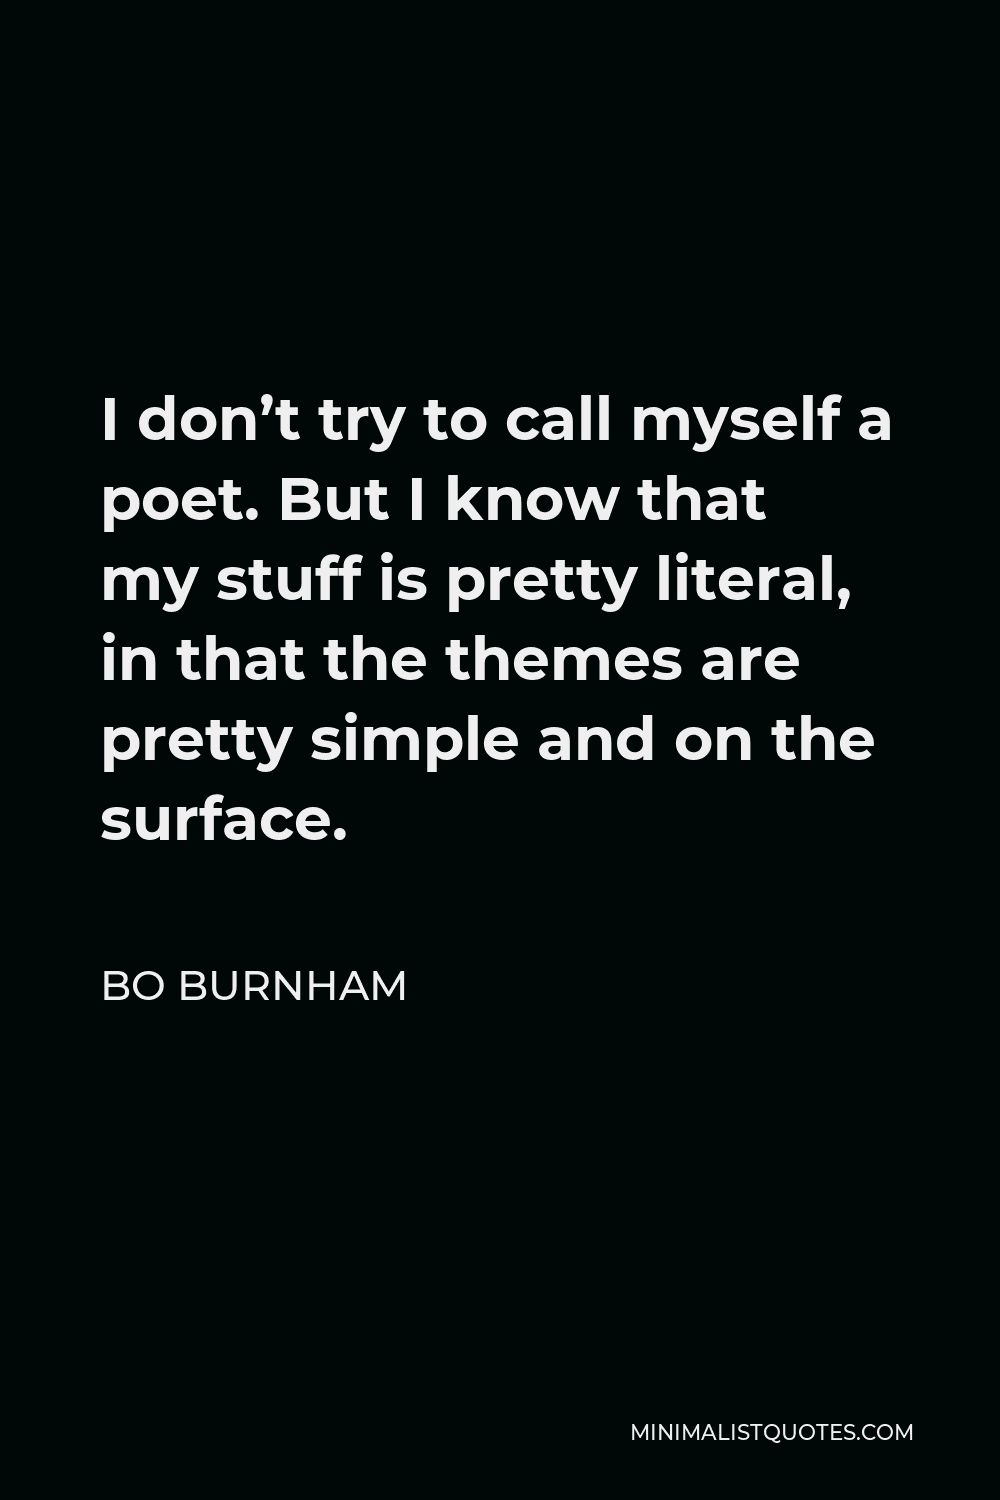 Bo Burnham Quote - I don’t try to call myself a poet. But I know that my stuff is pretty literal, in that the themes are pretty simple and on the surface.